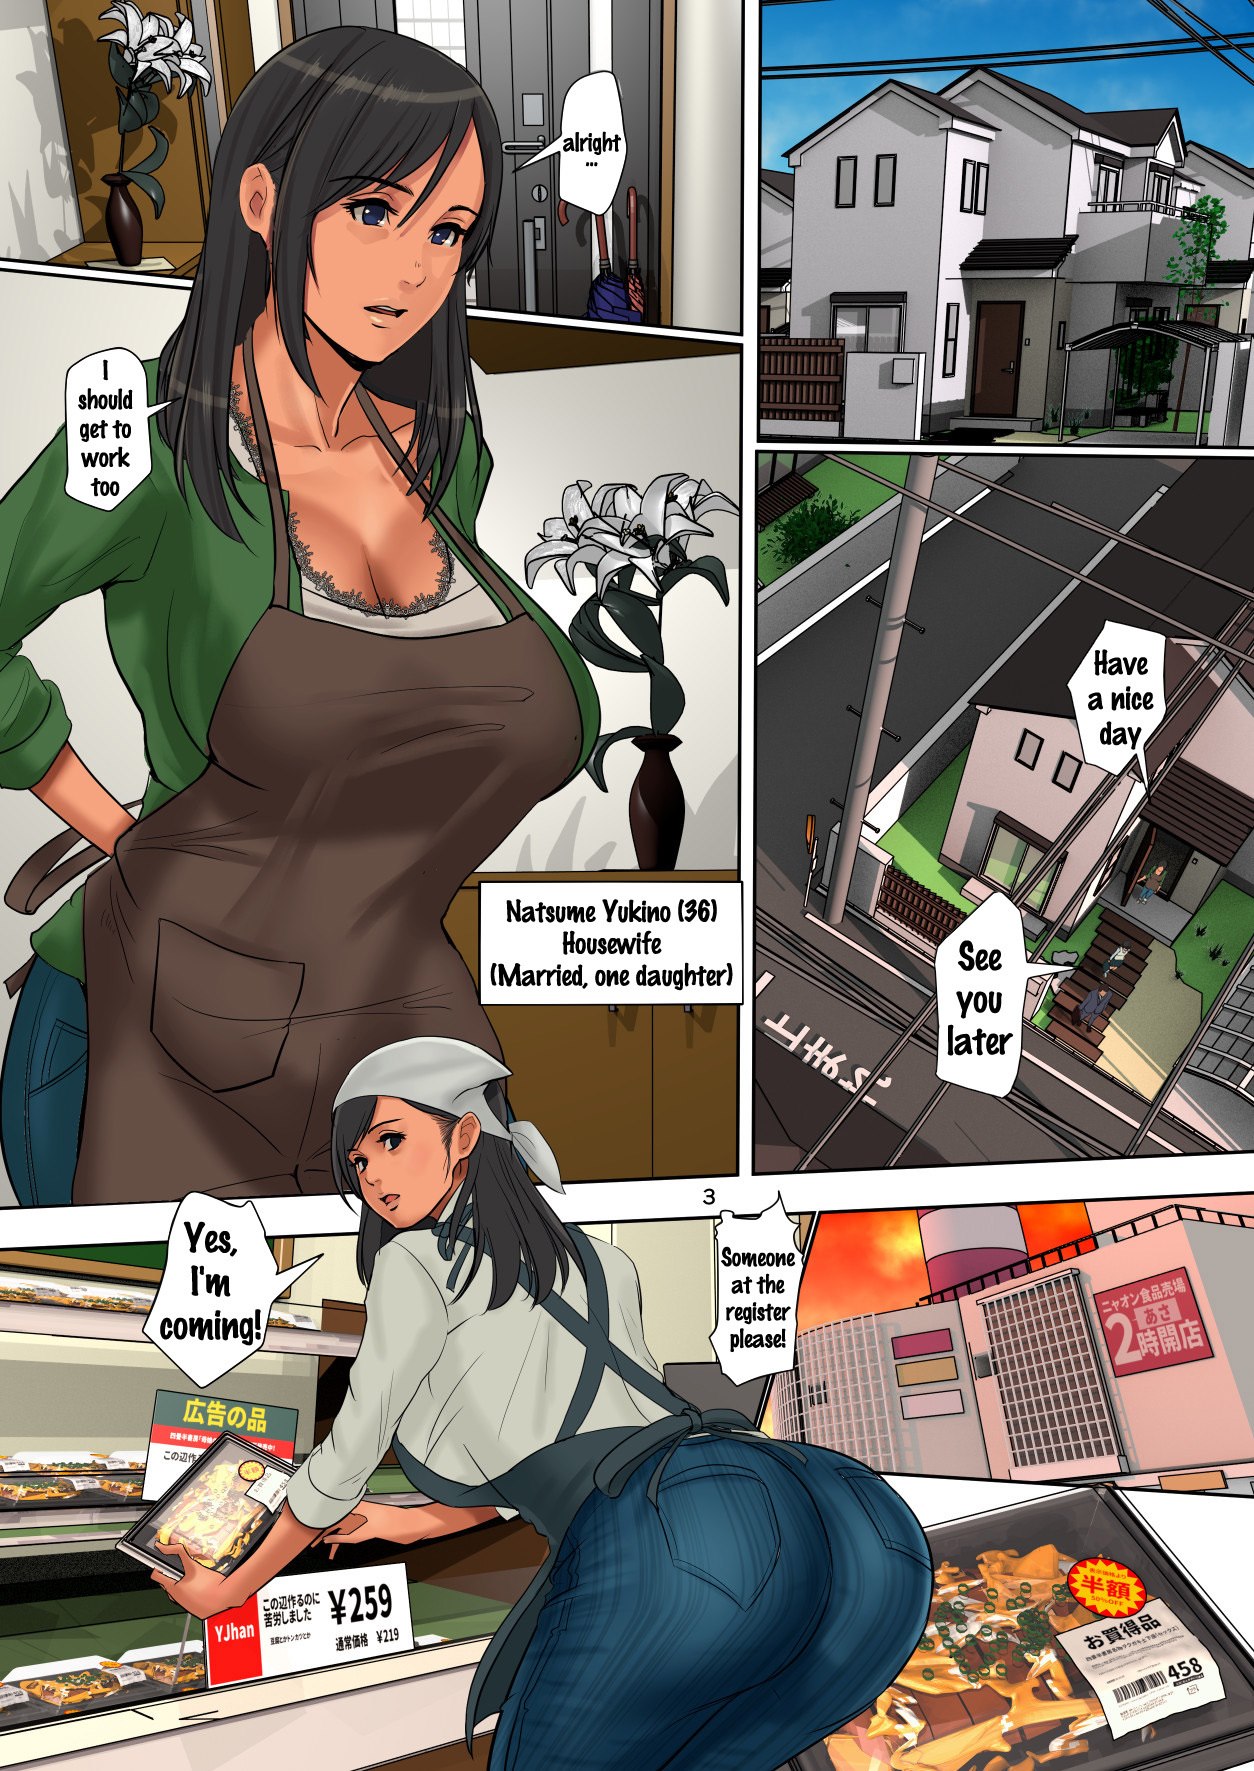 Busty Milf For Money - Busty MILF Blackmailed For Money - Yojouhan Shobou Â» Porn Comics Galleries